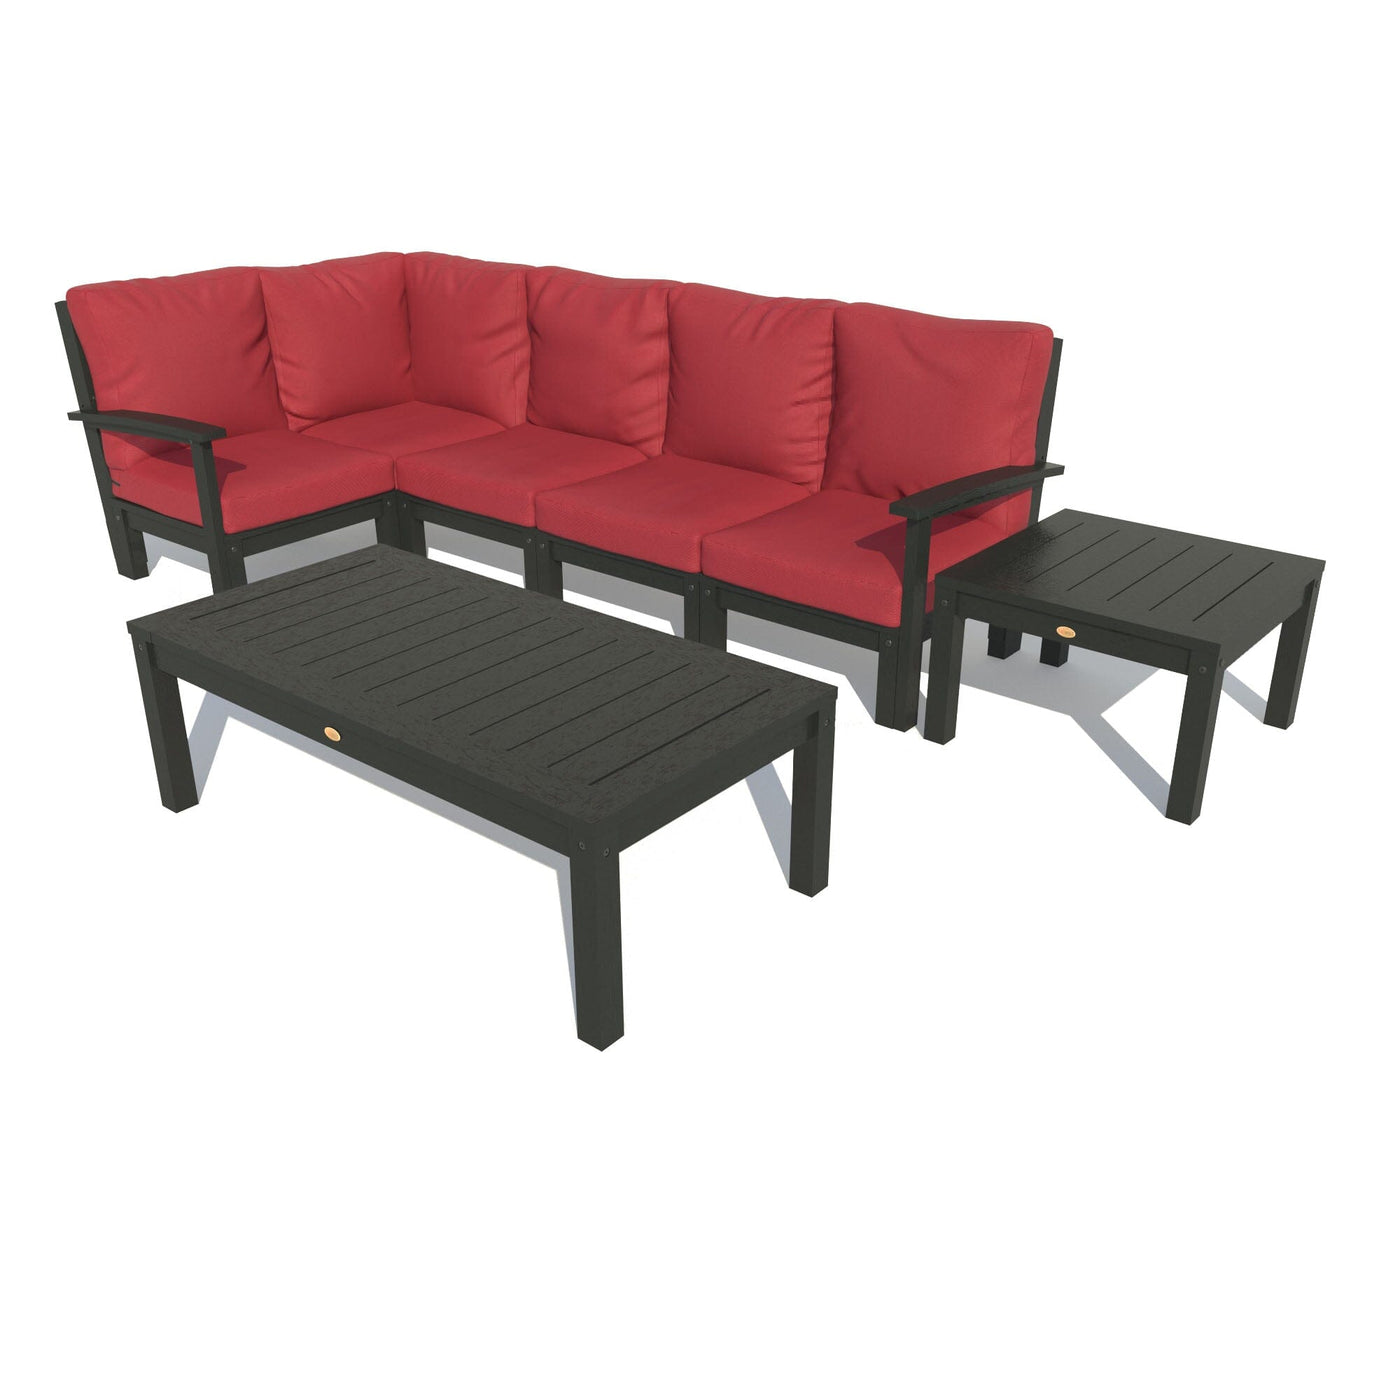 Bespoke Deep Seating: 7 Piece Sectional Set with Conversation and Side Table Deep Seating Highwood USA Firecracker Red Black 